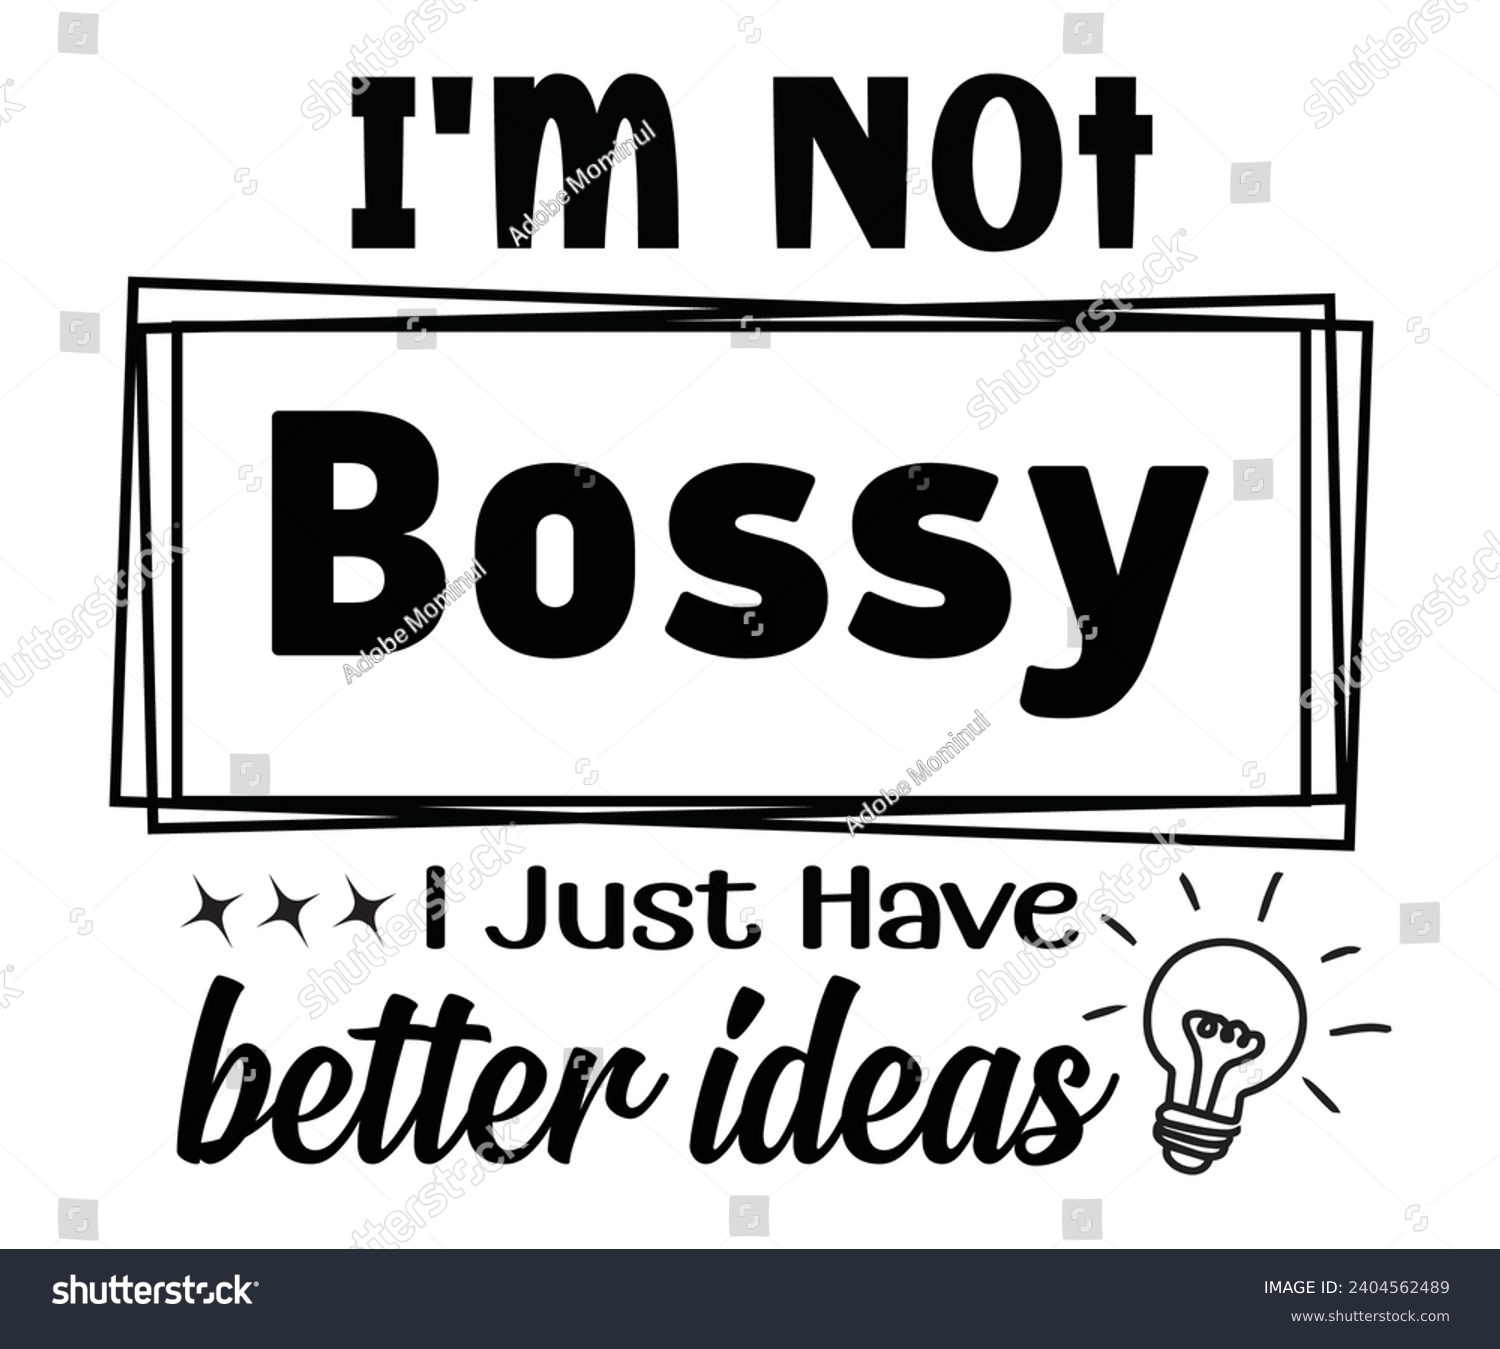 SVG of I'm Not Bossy I Just Have Better Ideas Svg,Boss Saying Quotes,Boss Day T-shirt,Gift for Boss,Great Jobs,Happy Bosses Day t-shirt,Girl Boss Shirt,Motivational Boss,Cut File,Circut And Silhouette, svg